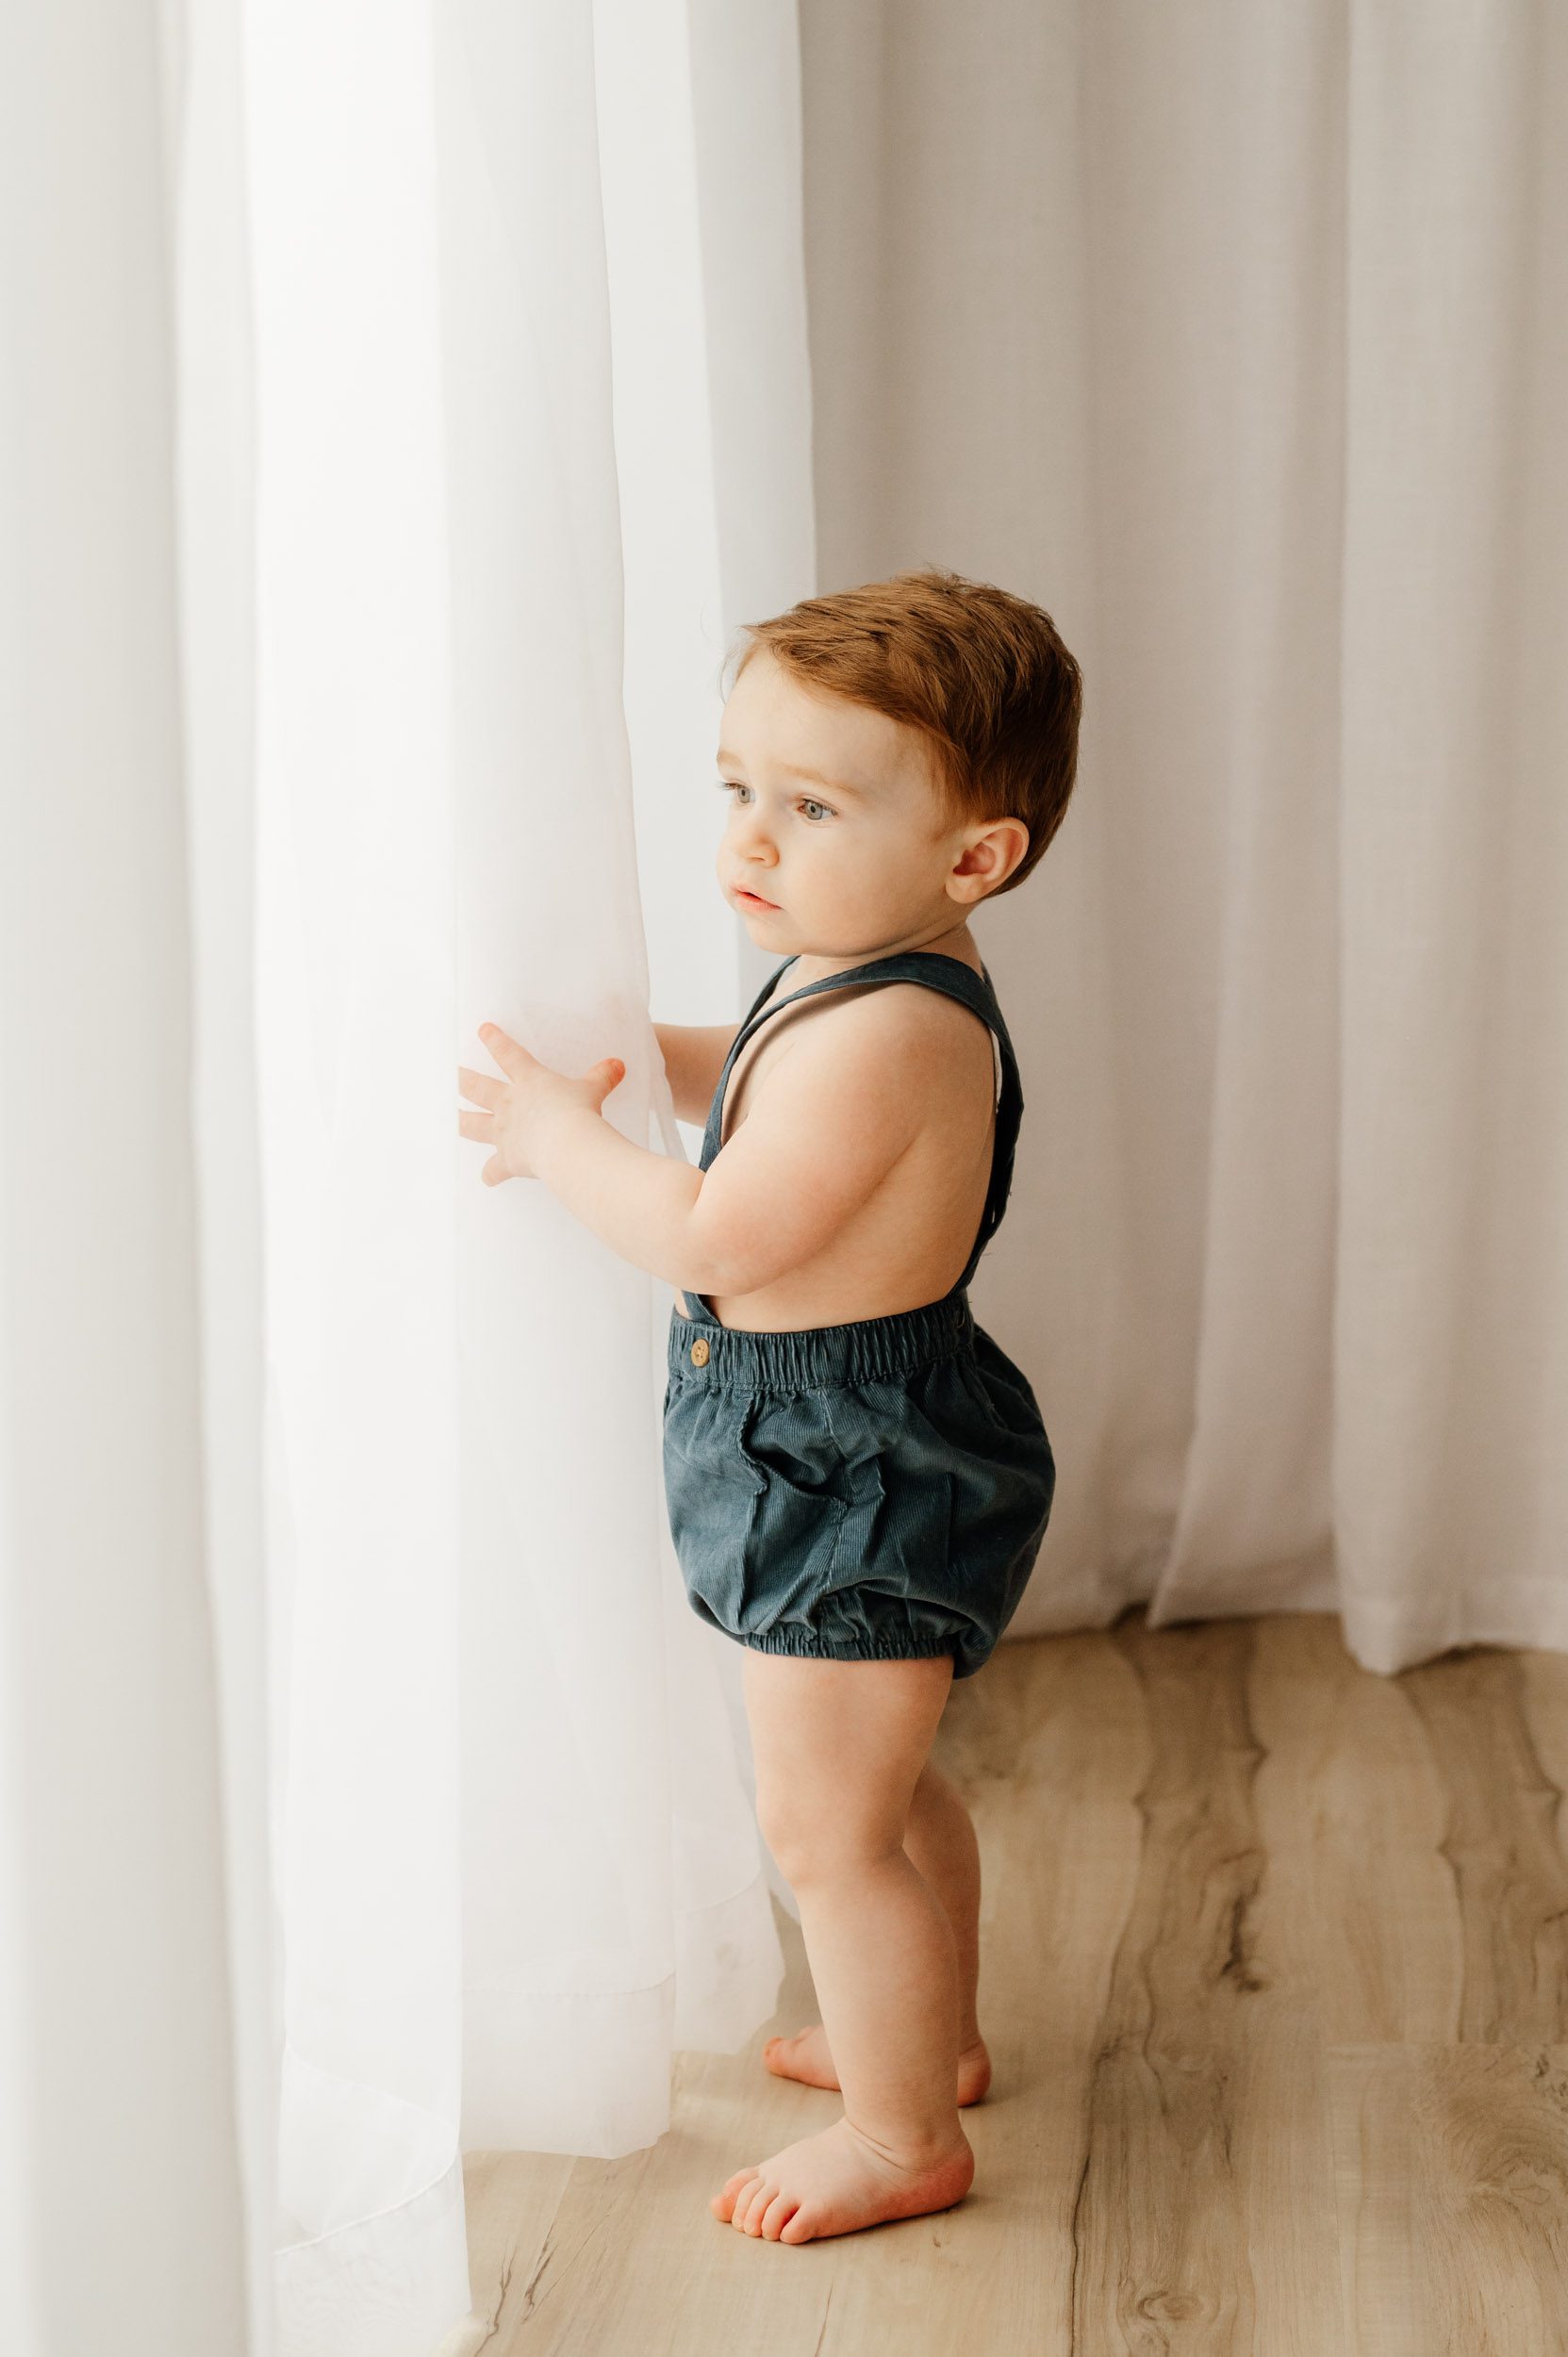 a young boy standing next to a window and reaching out to touch the sheer curtains and he gazes outside during a toddler milestone photography session